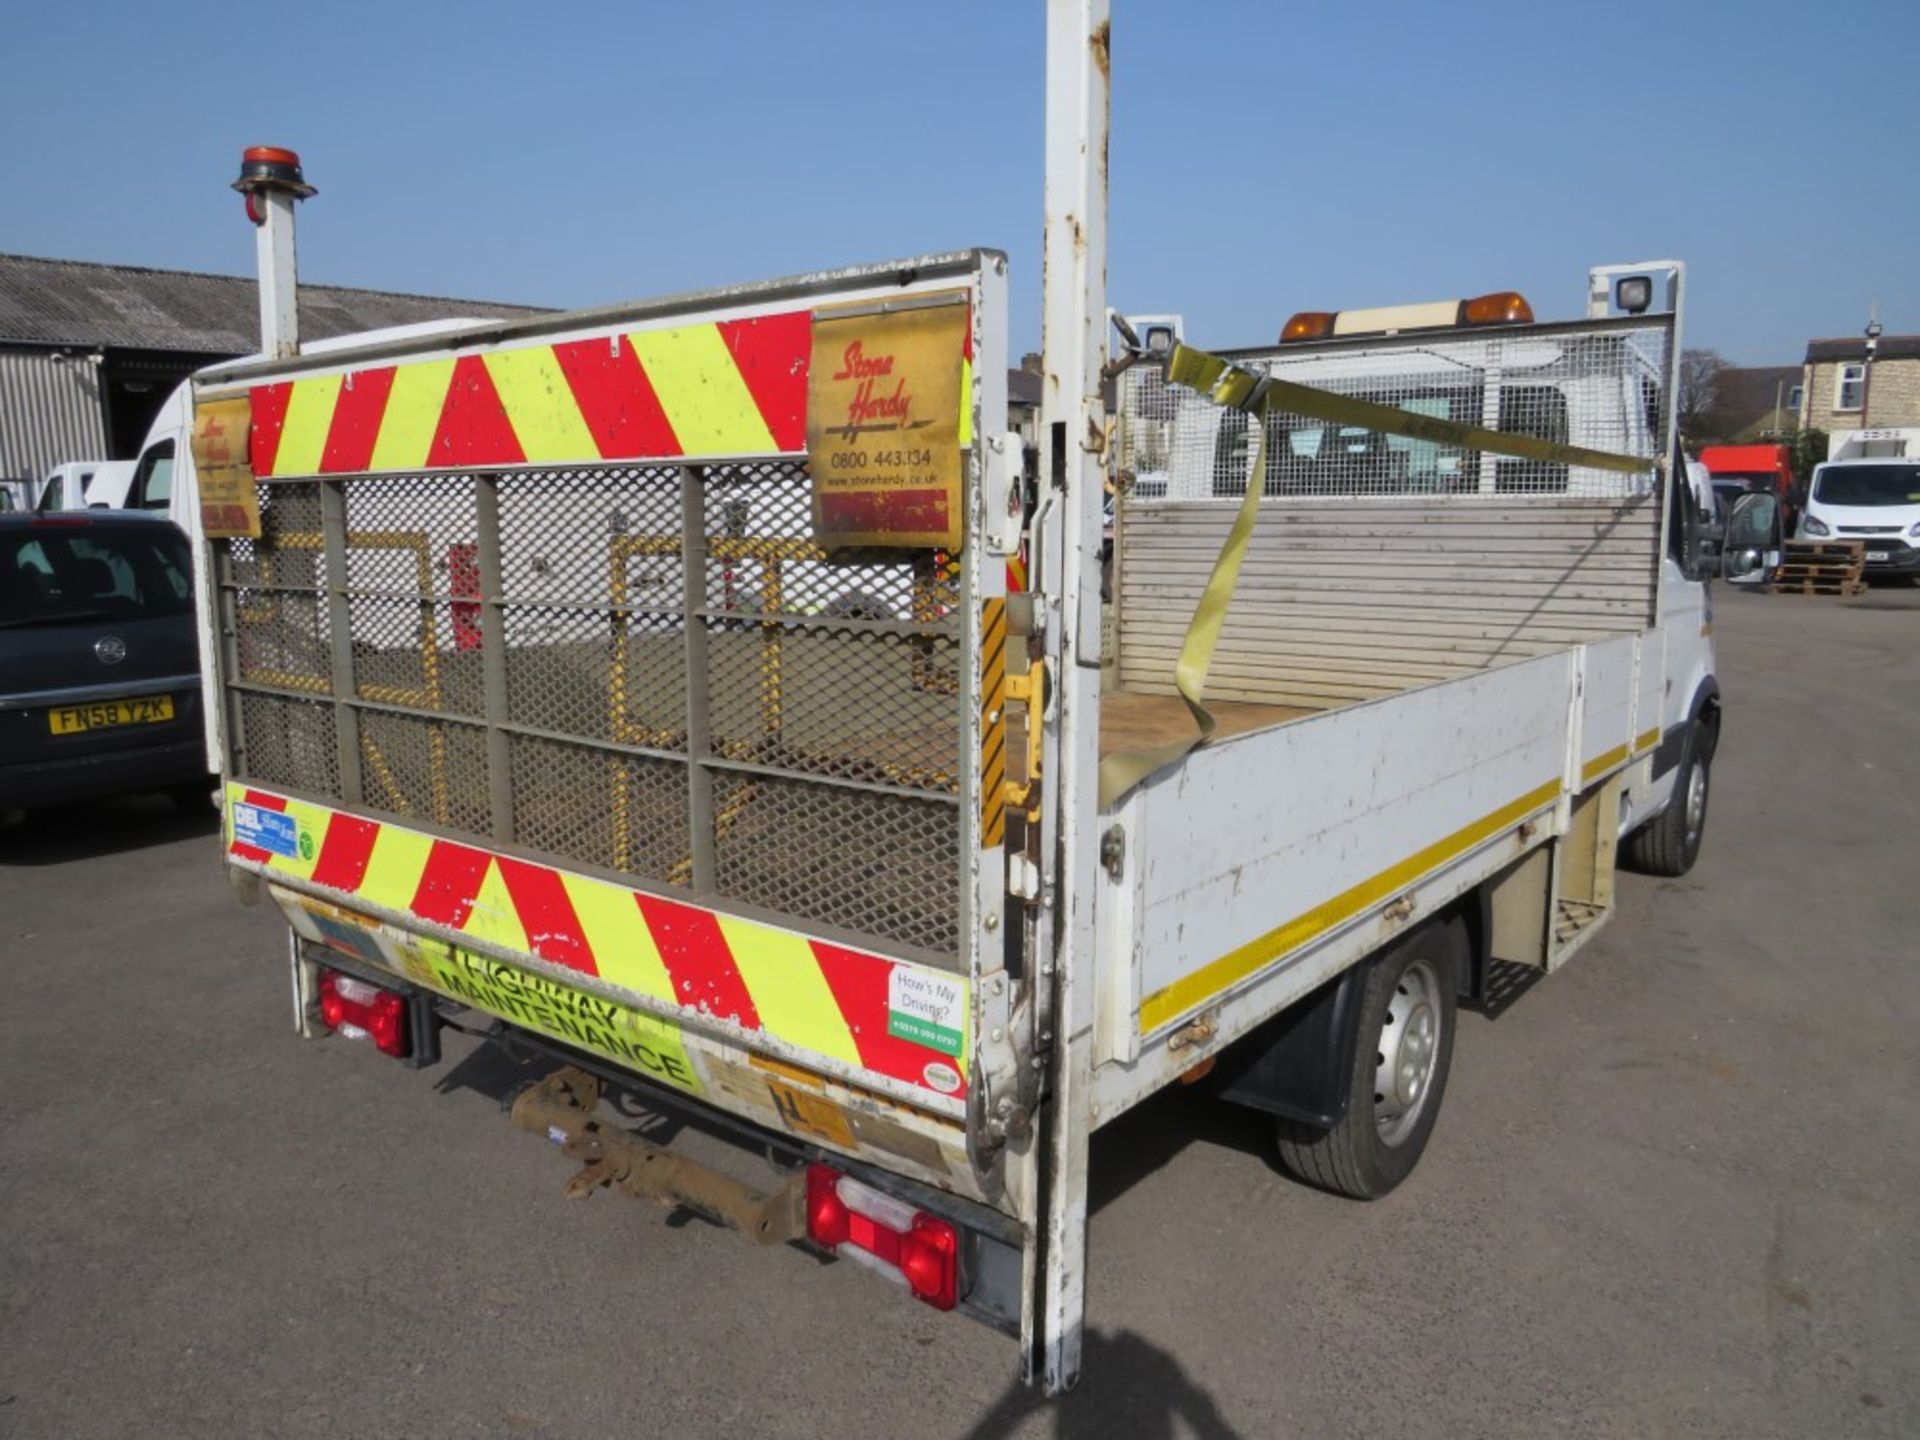 14 reg IVECO 35S13 DROPSIDE C/W TAIL LIFT, 1ST REG 03/14, TEST 03/22, 103921M WARRANTED, V5 HERE, - Image 4 of 6